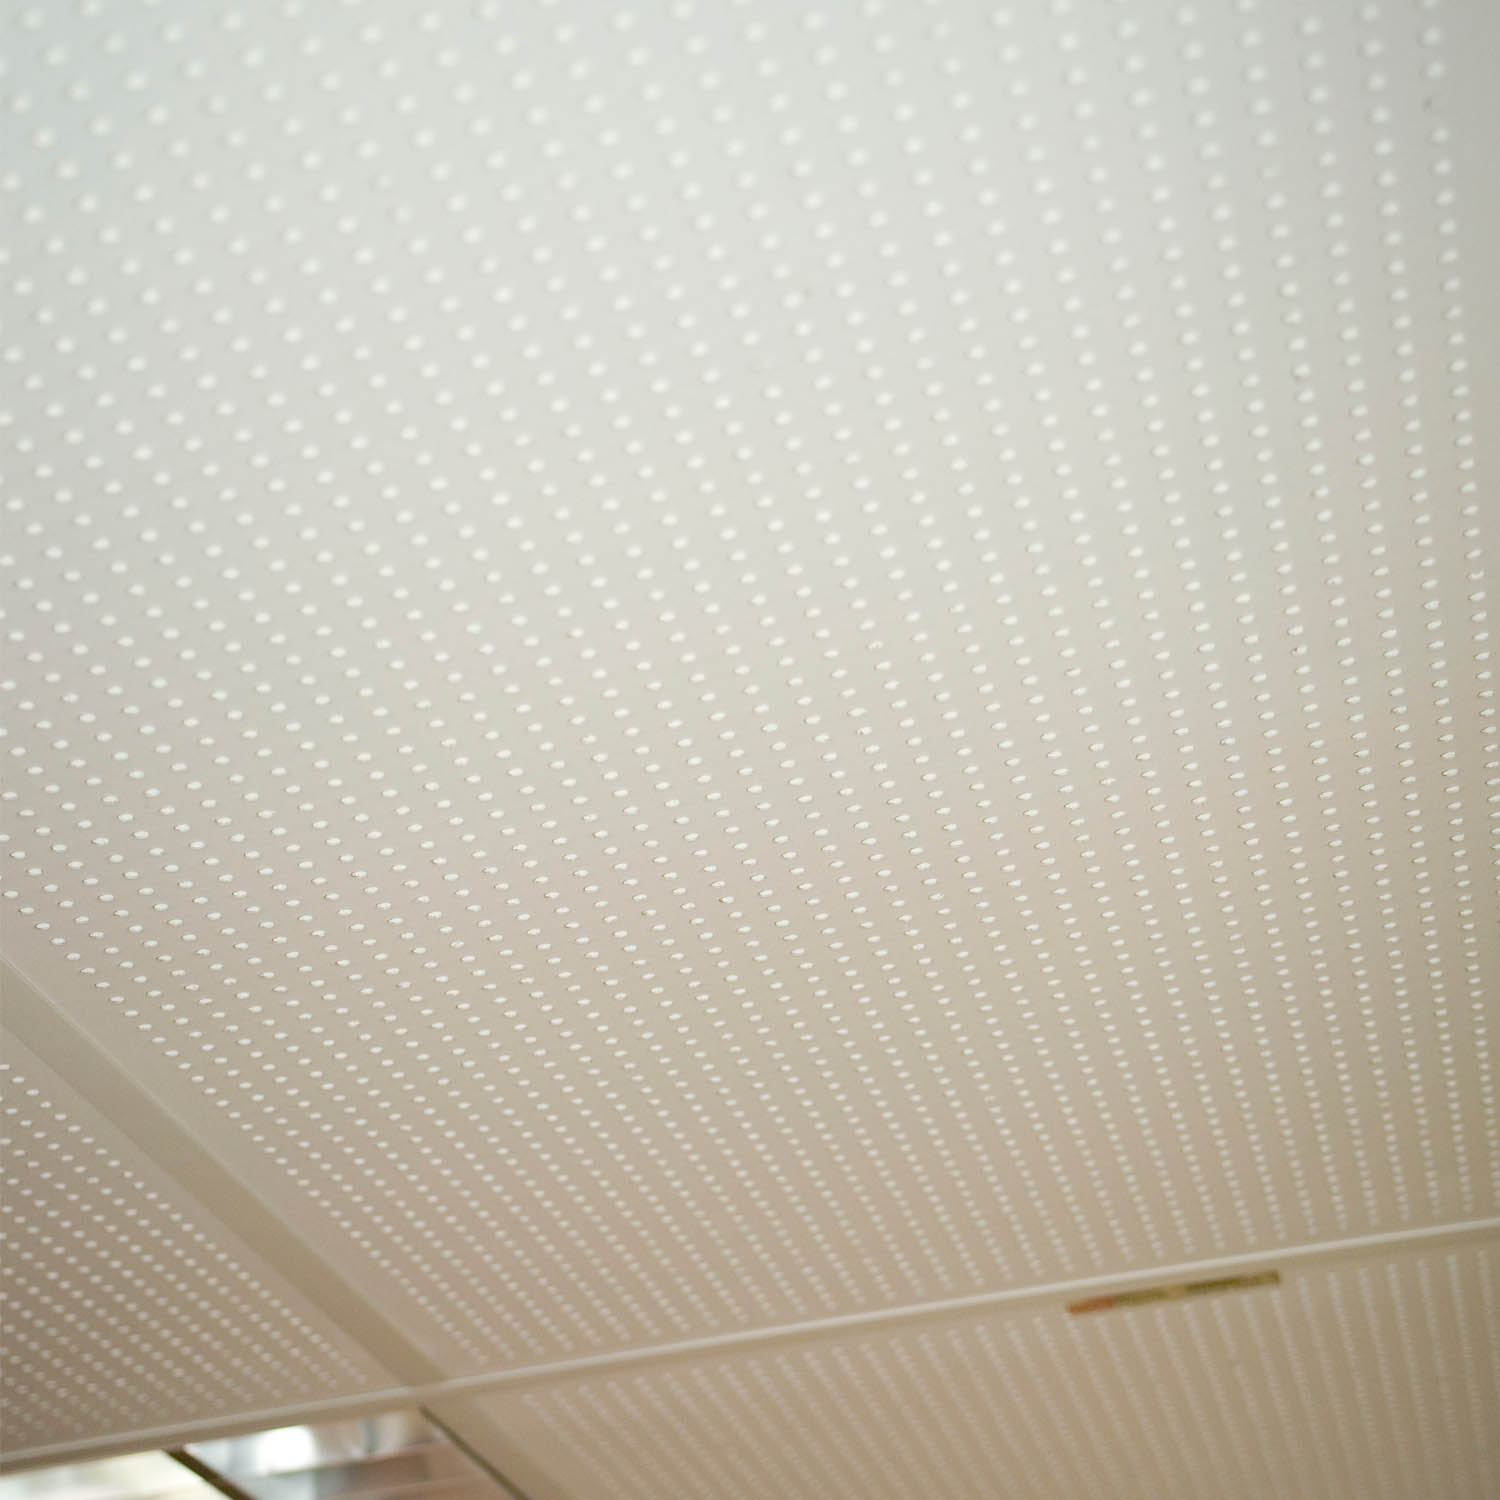 Perforated Ceiling Tiles For Exposed Grid Systems